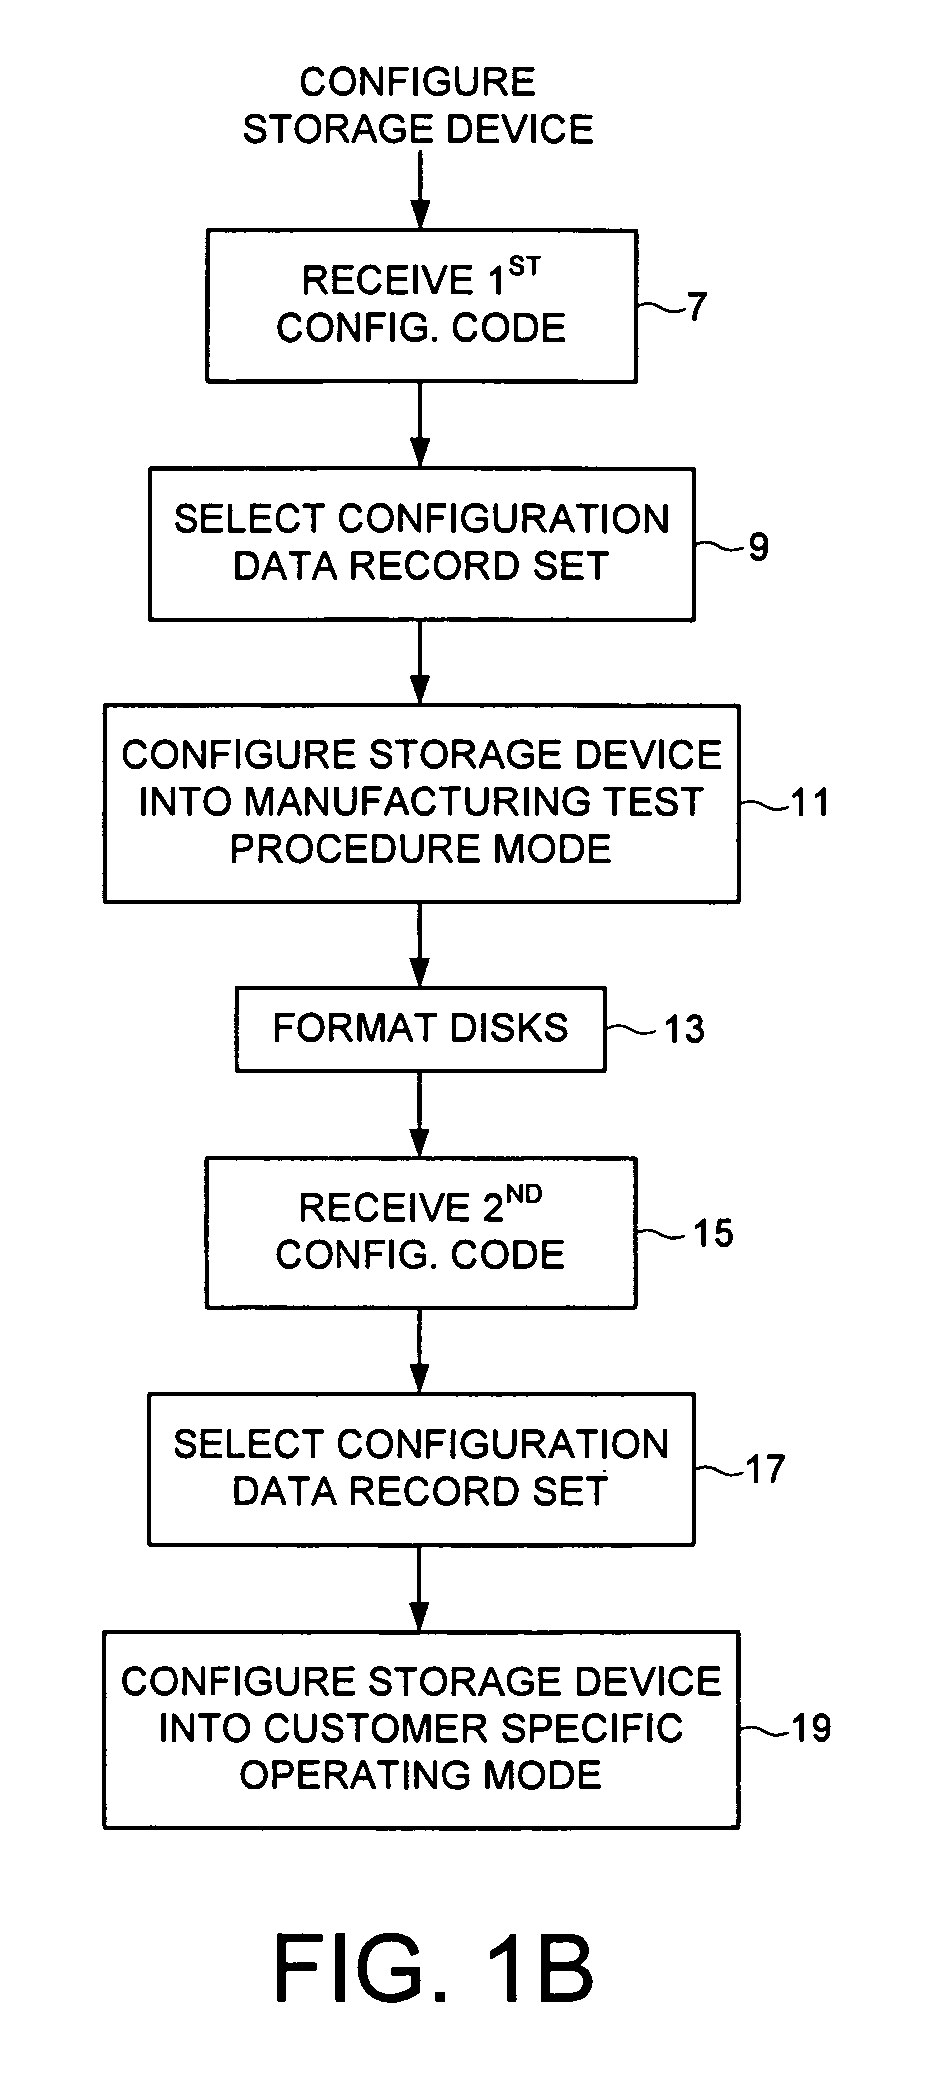 Configuring a data storage device with a configuration data record set in response to a configuration code